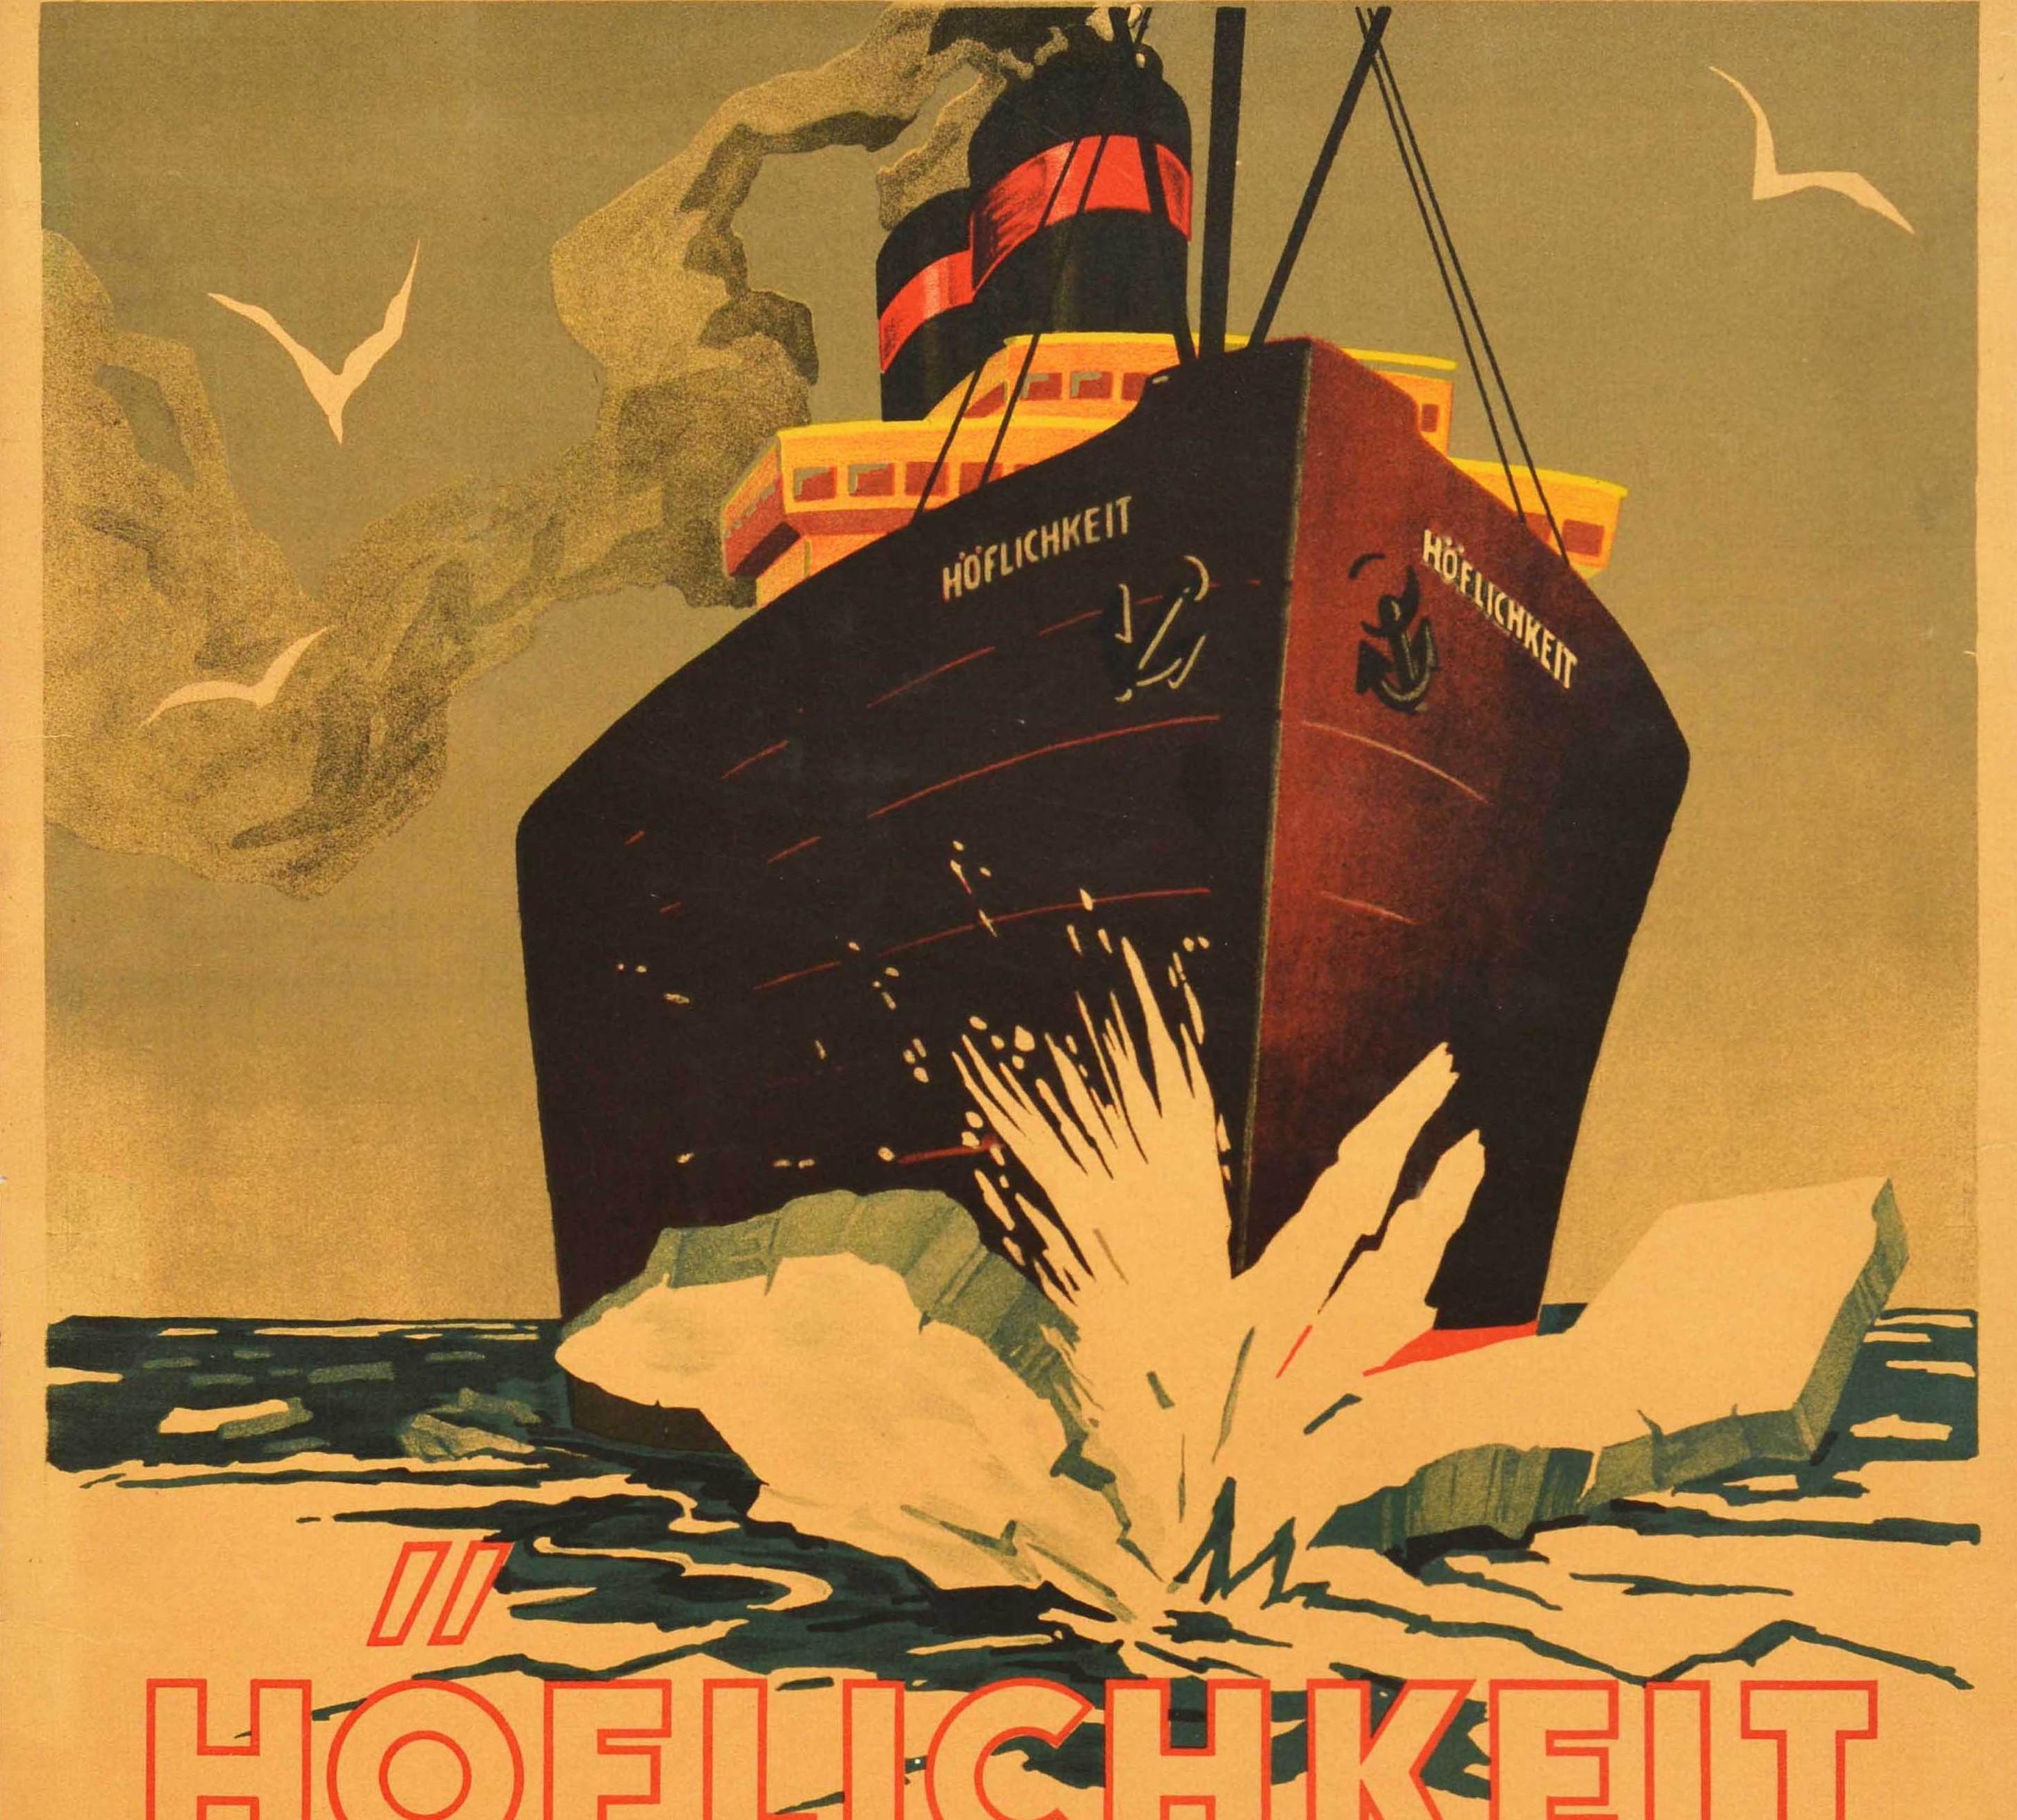 Original vintage German motivational workplace poster issued by the Parker-Holladay company in Berlin featuring an illustration of a an icebreaker ship named the Hoflichkeit sailing through the icy sea with birds flying overhead and the quote below